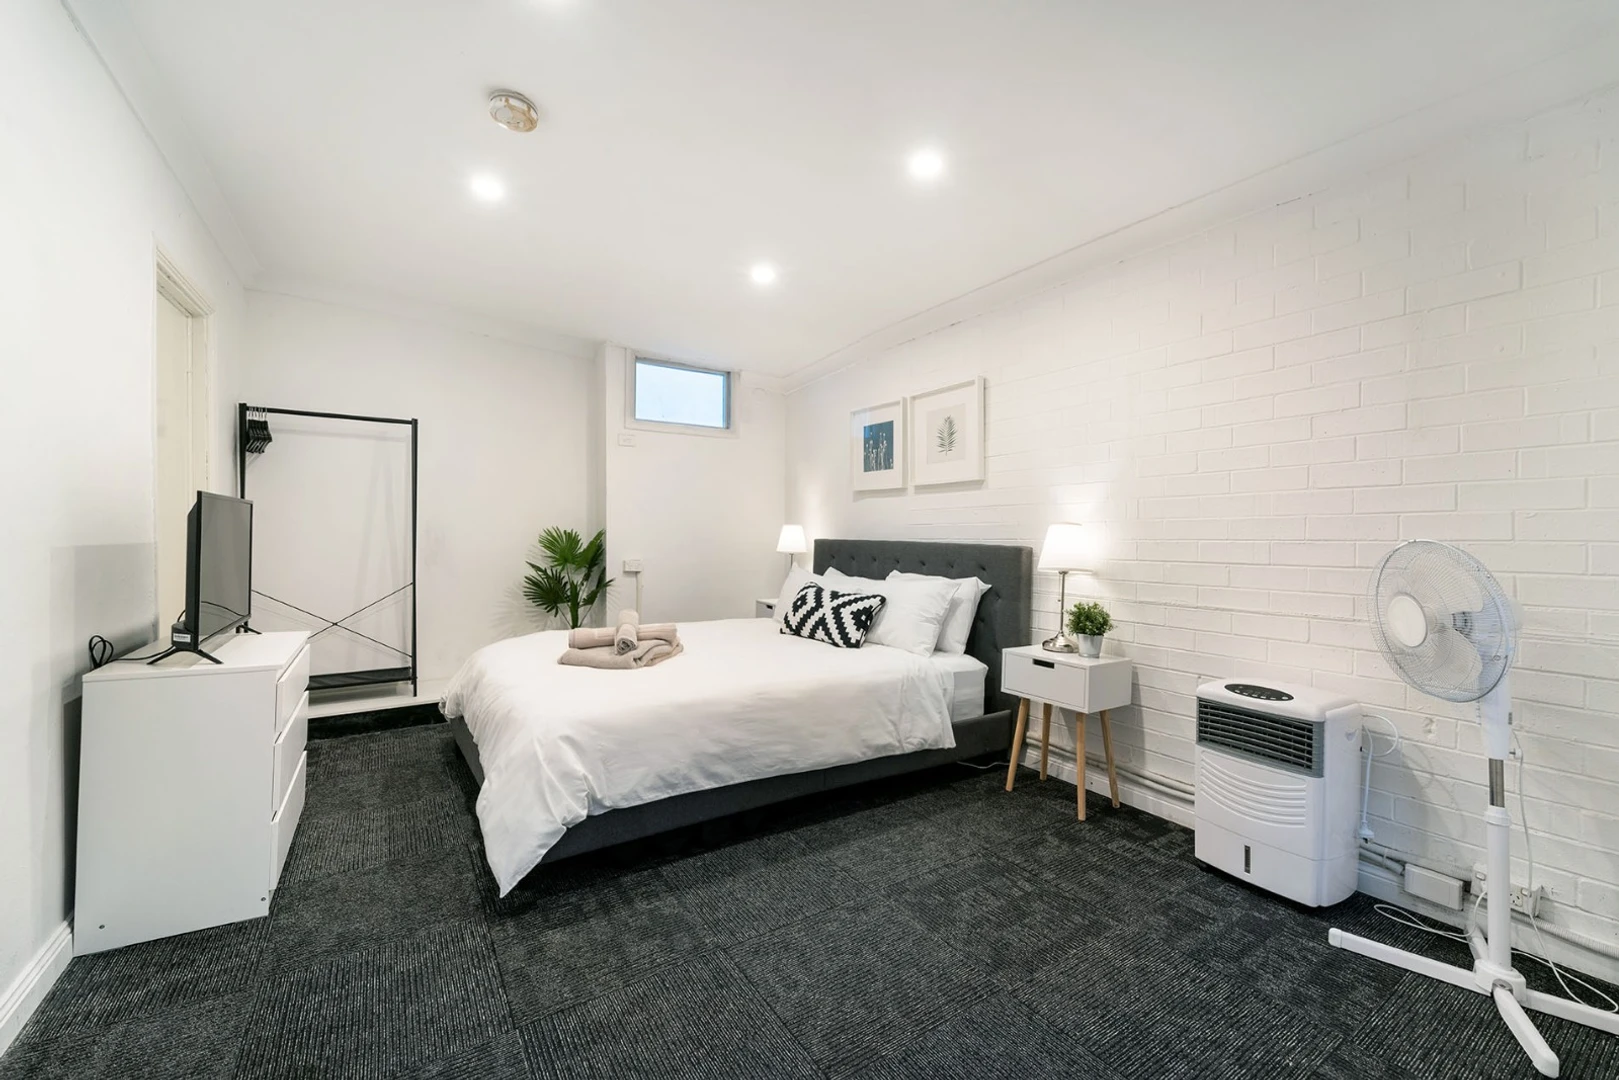 Cheap private room in Sydney